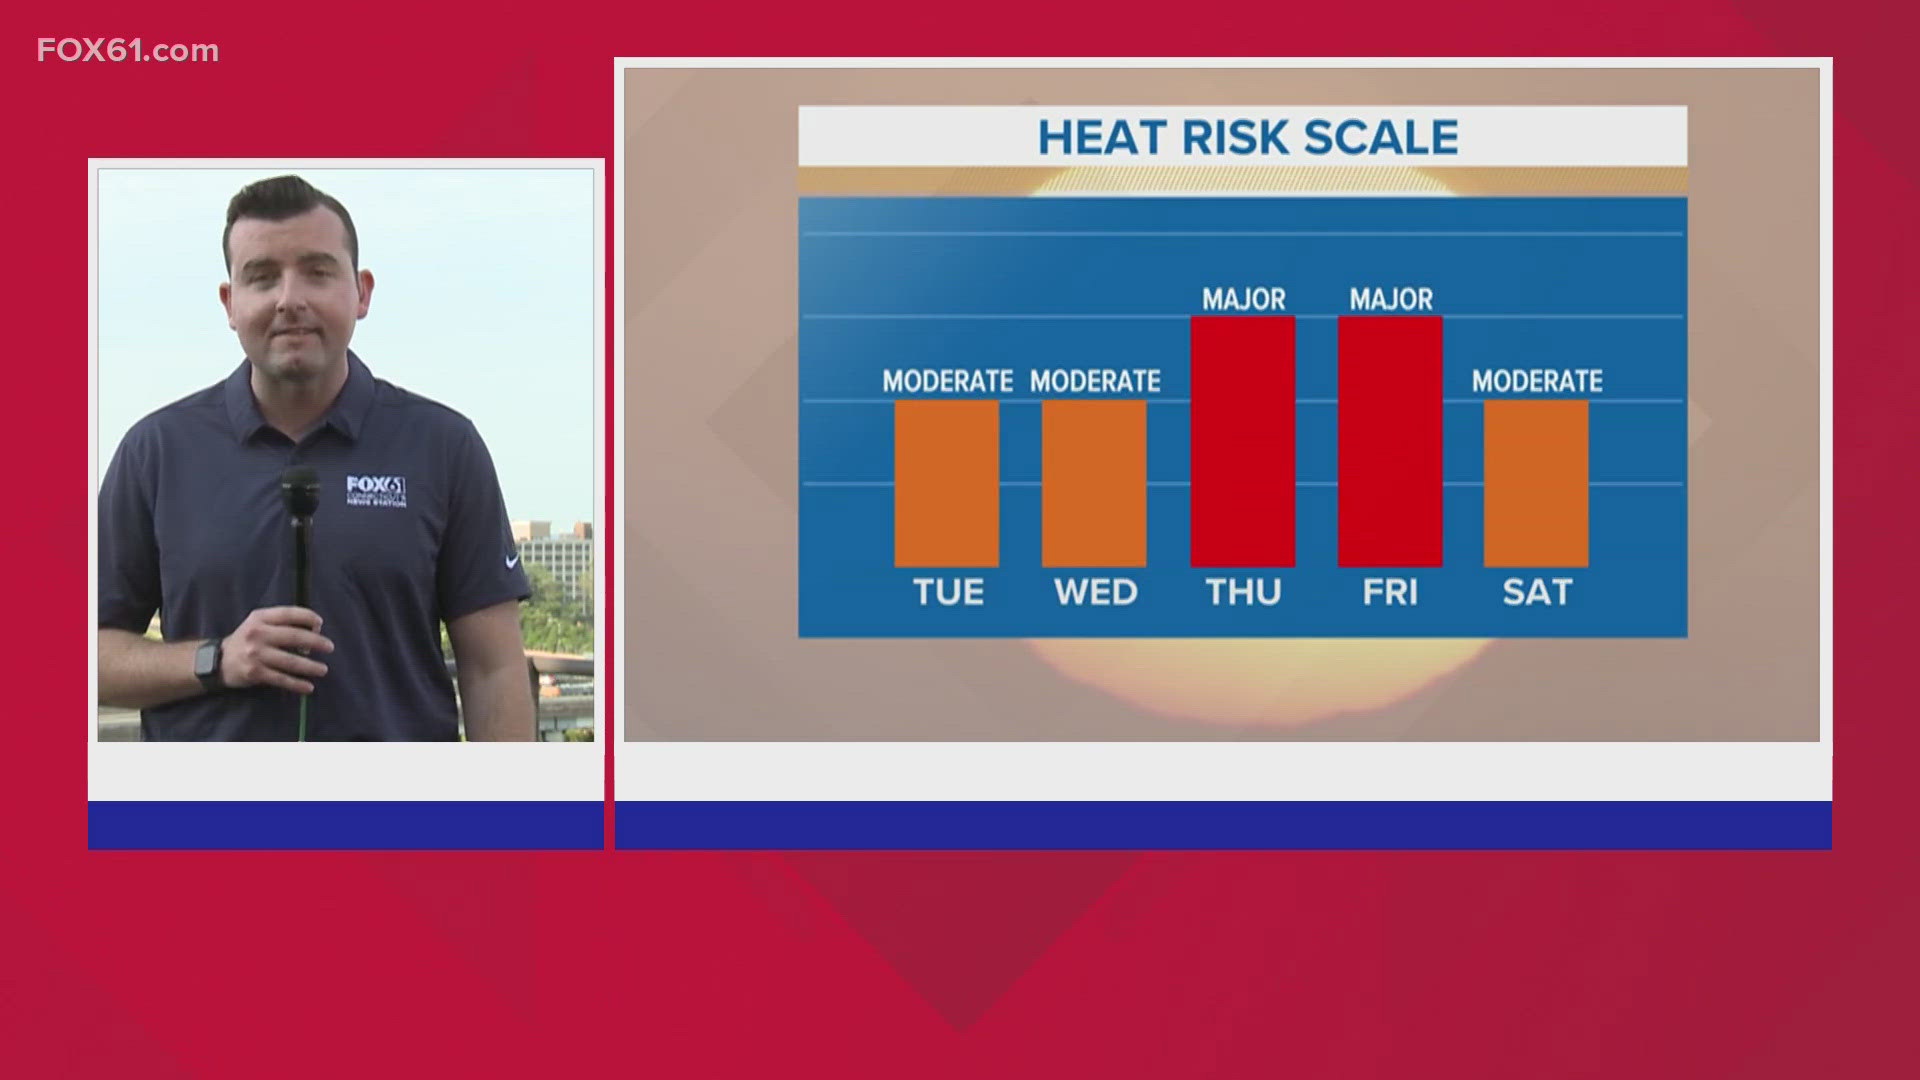 FOX61's Ryan Breton talks about the impact of this week's heat wave across Connecticut.